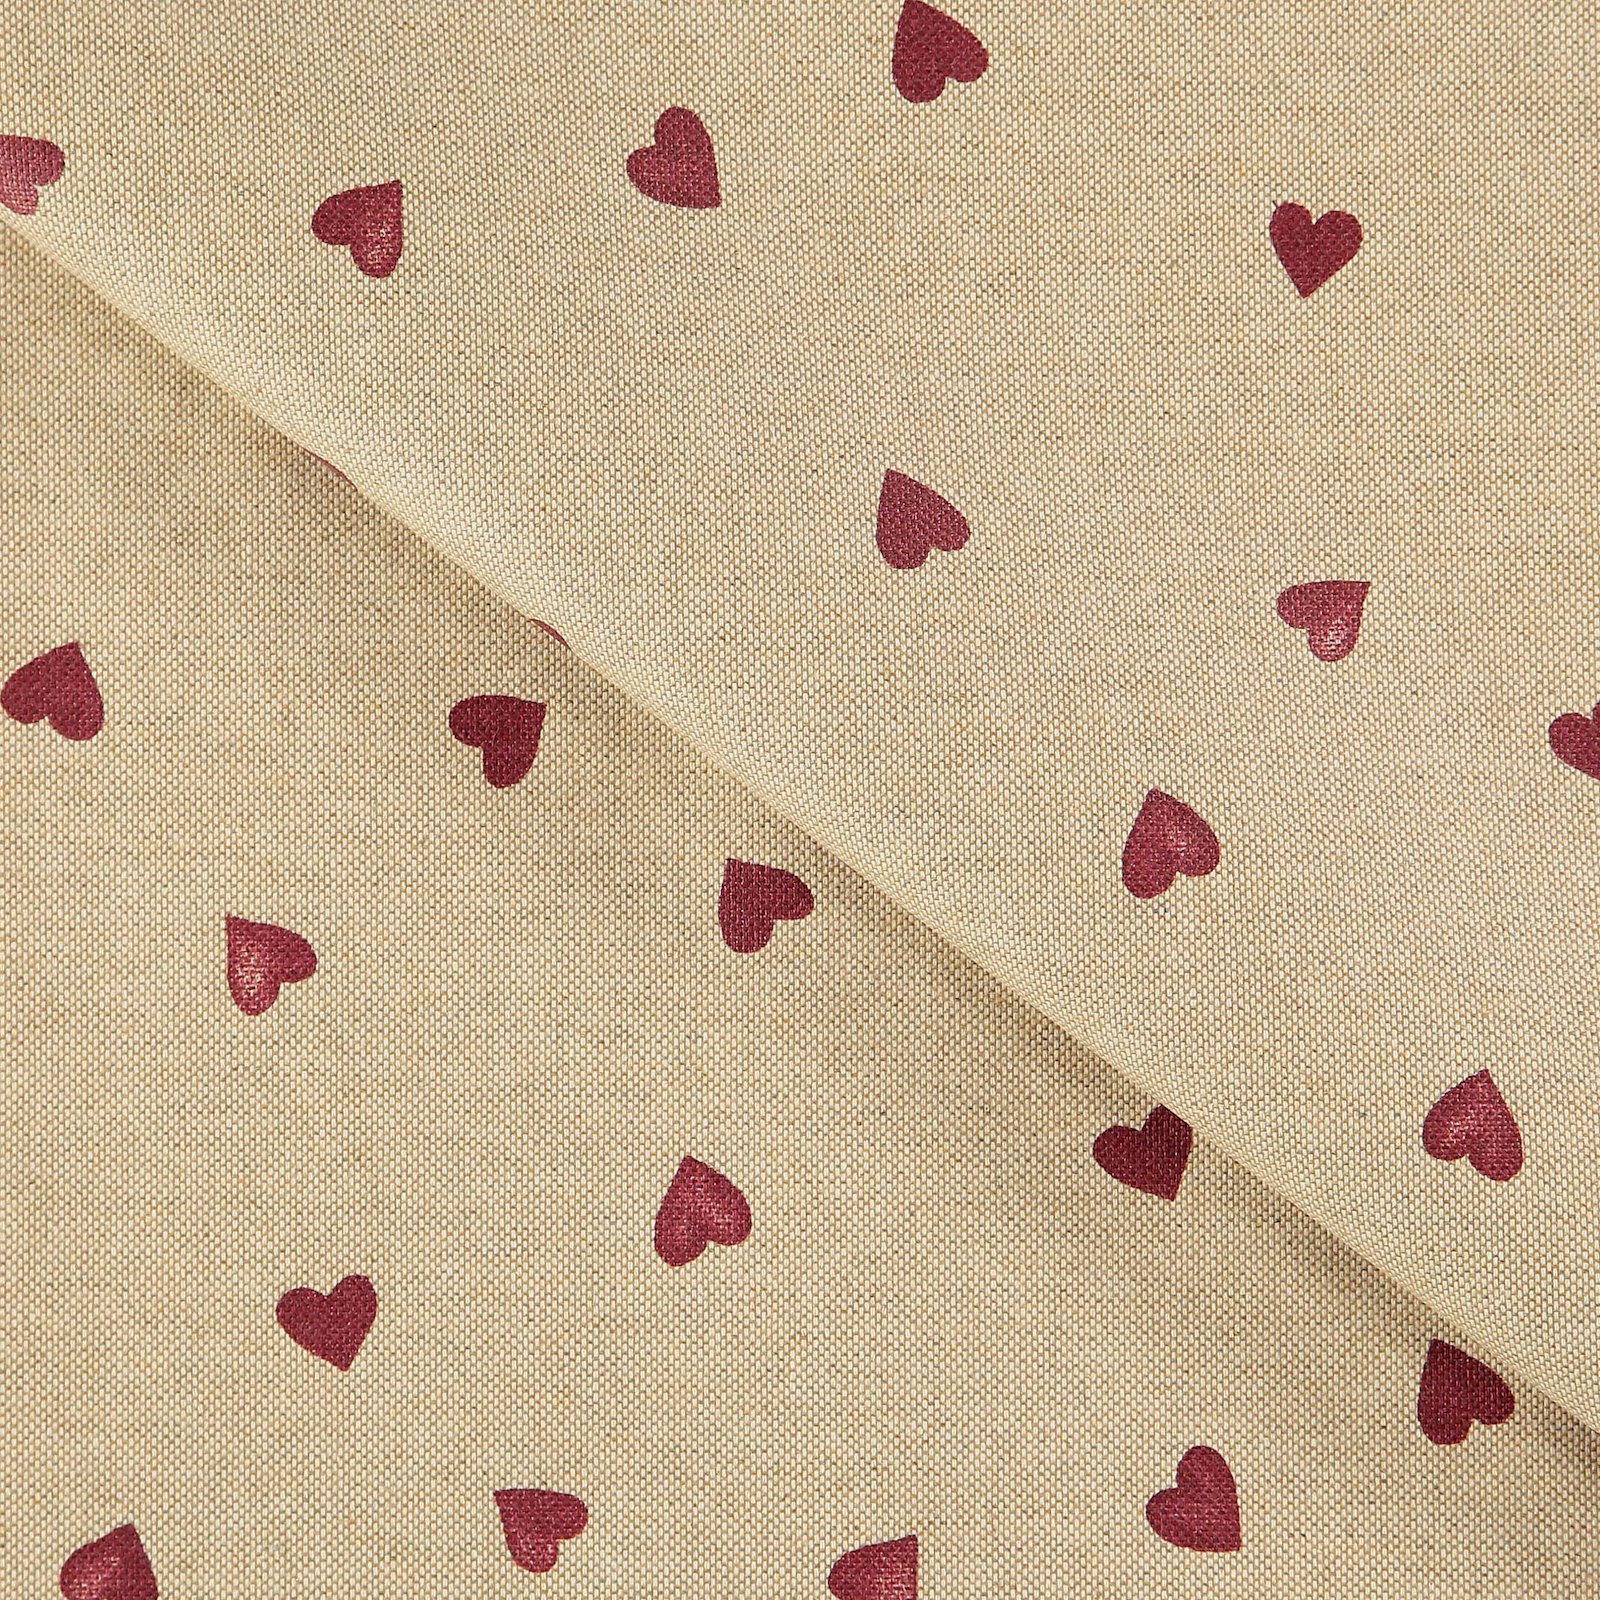 Woven oilcloth linenlook with red hearts 872310_pack